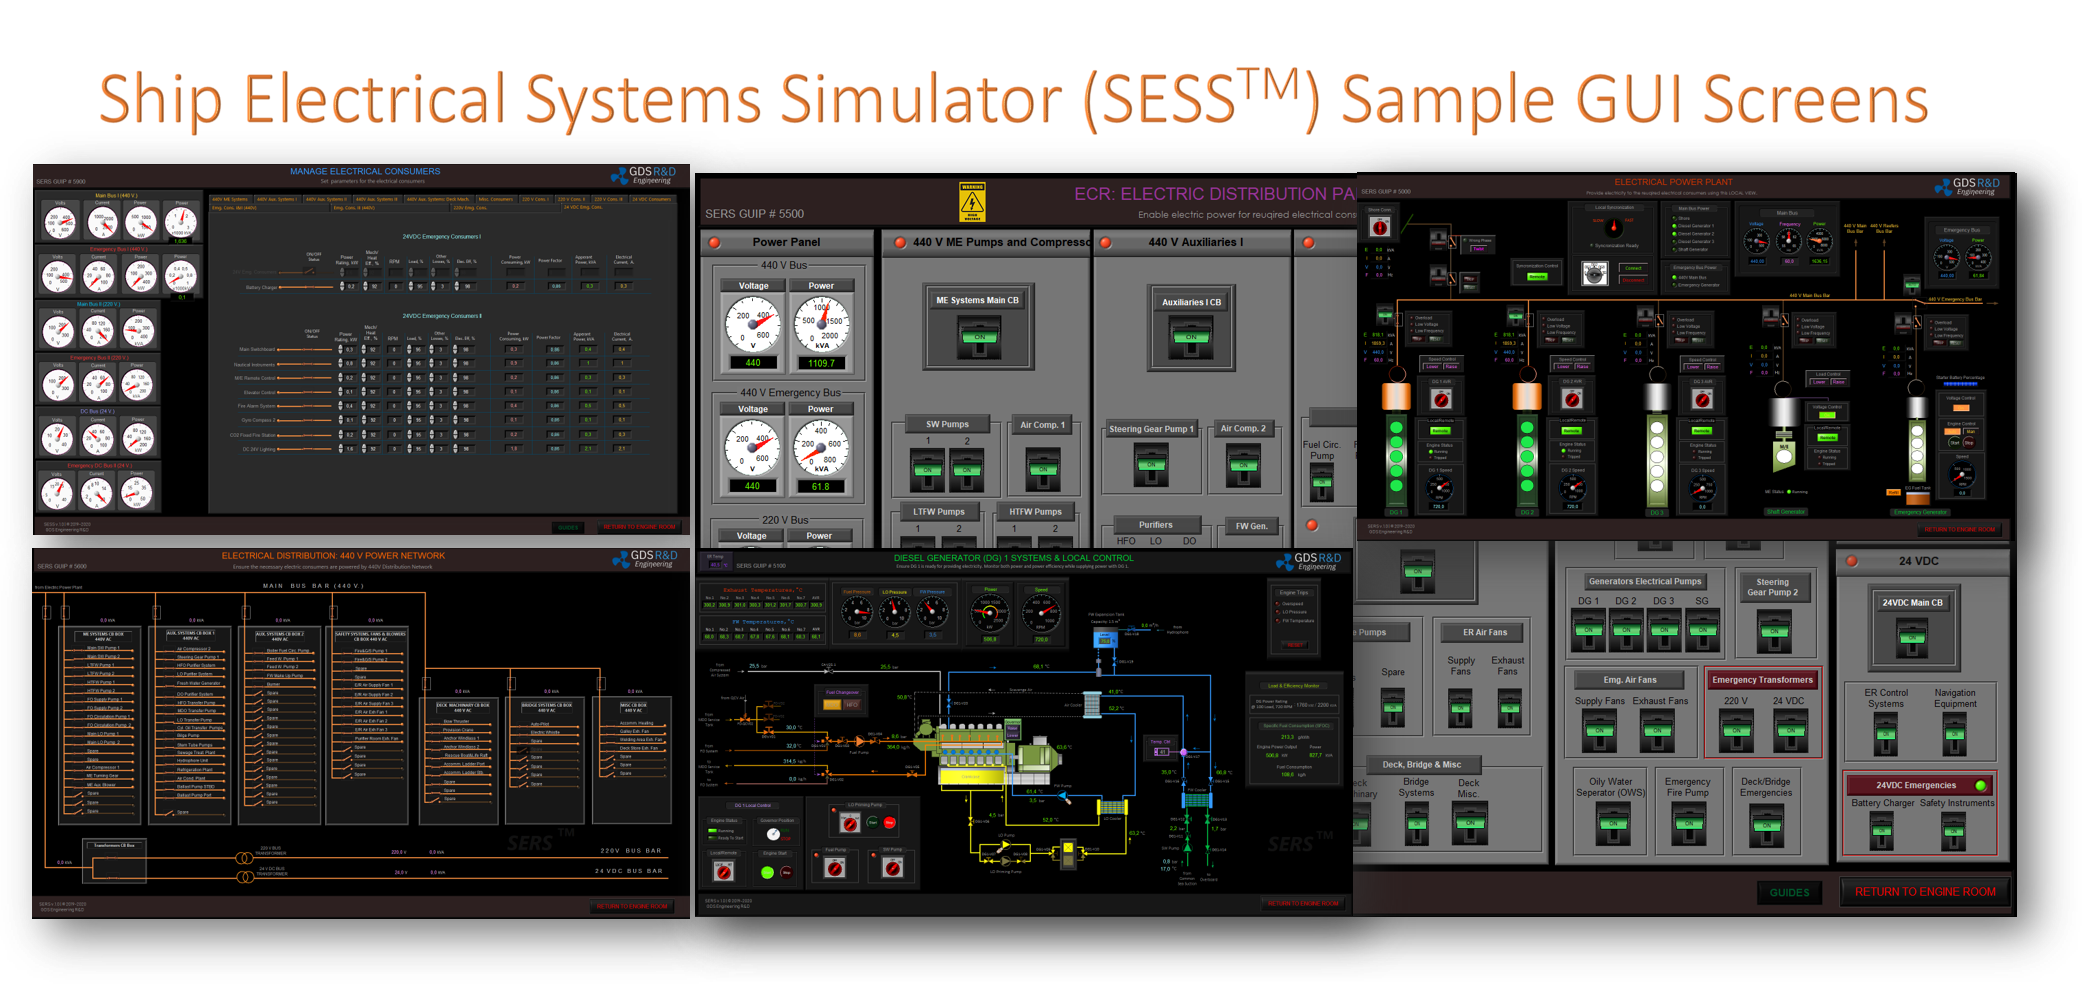 Ship Electrical Systems Engine Room Simulator Sample GUI Screens IMO STCW 2010 Containership